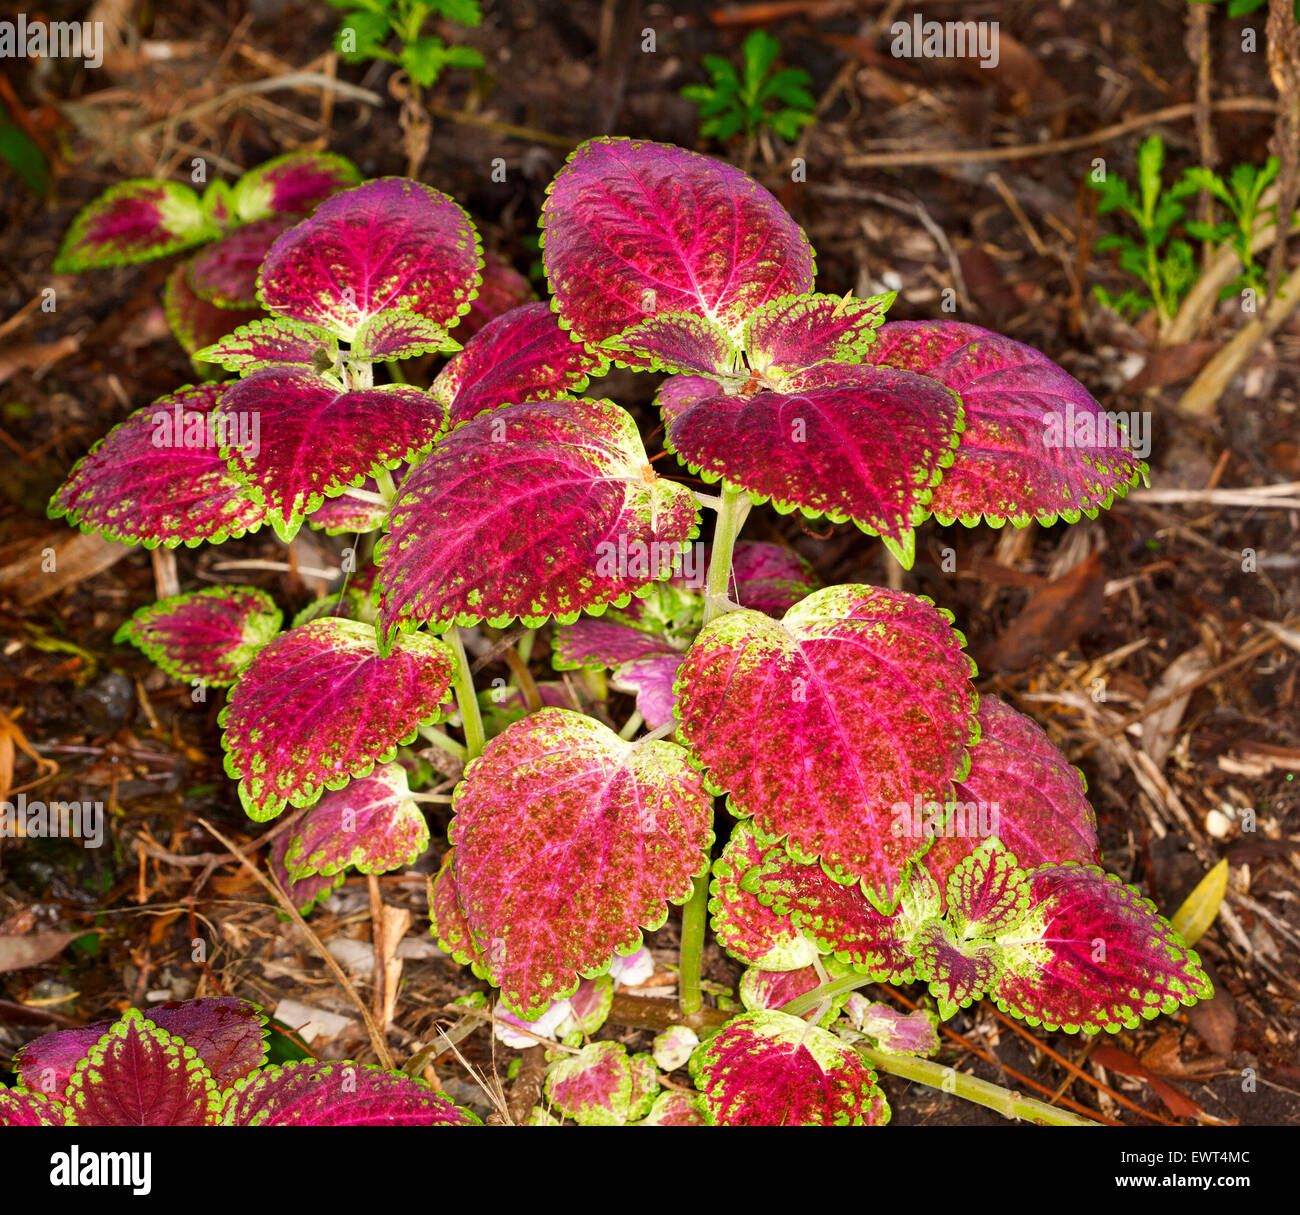 Vivid red leaves with green and yellow edges of coleus, painted nettle plant, Solenostemon scutellarioides on dark background Stock Photo